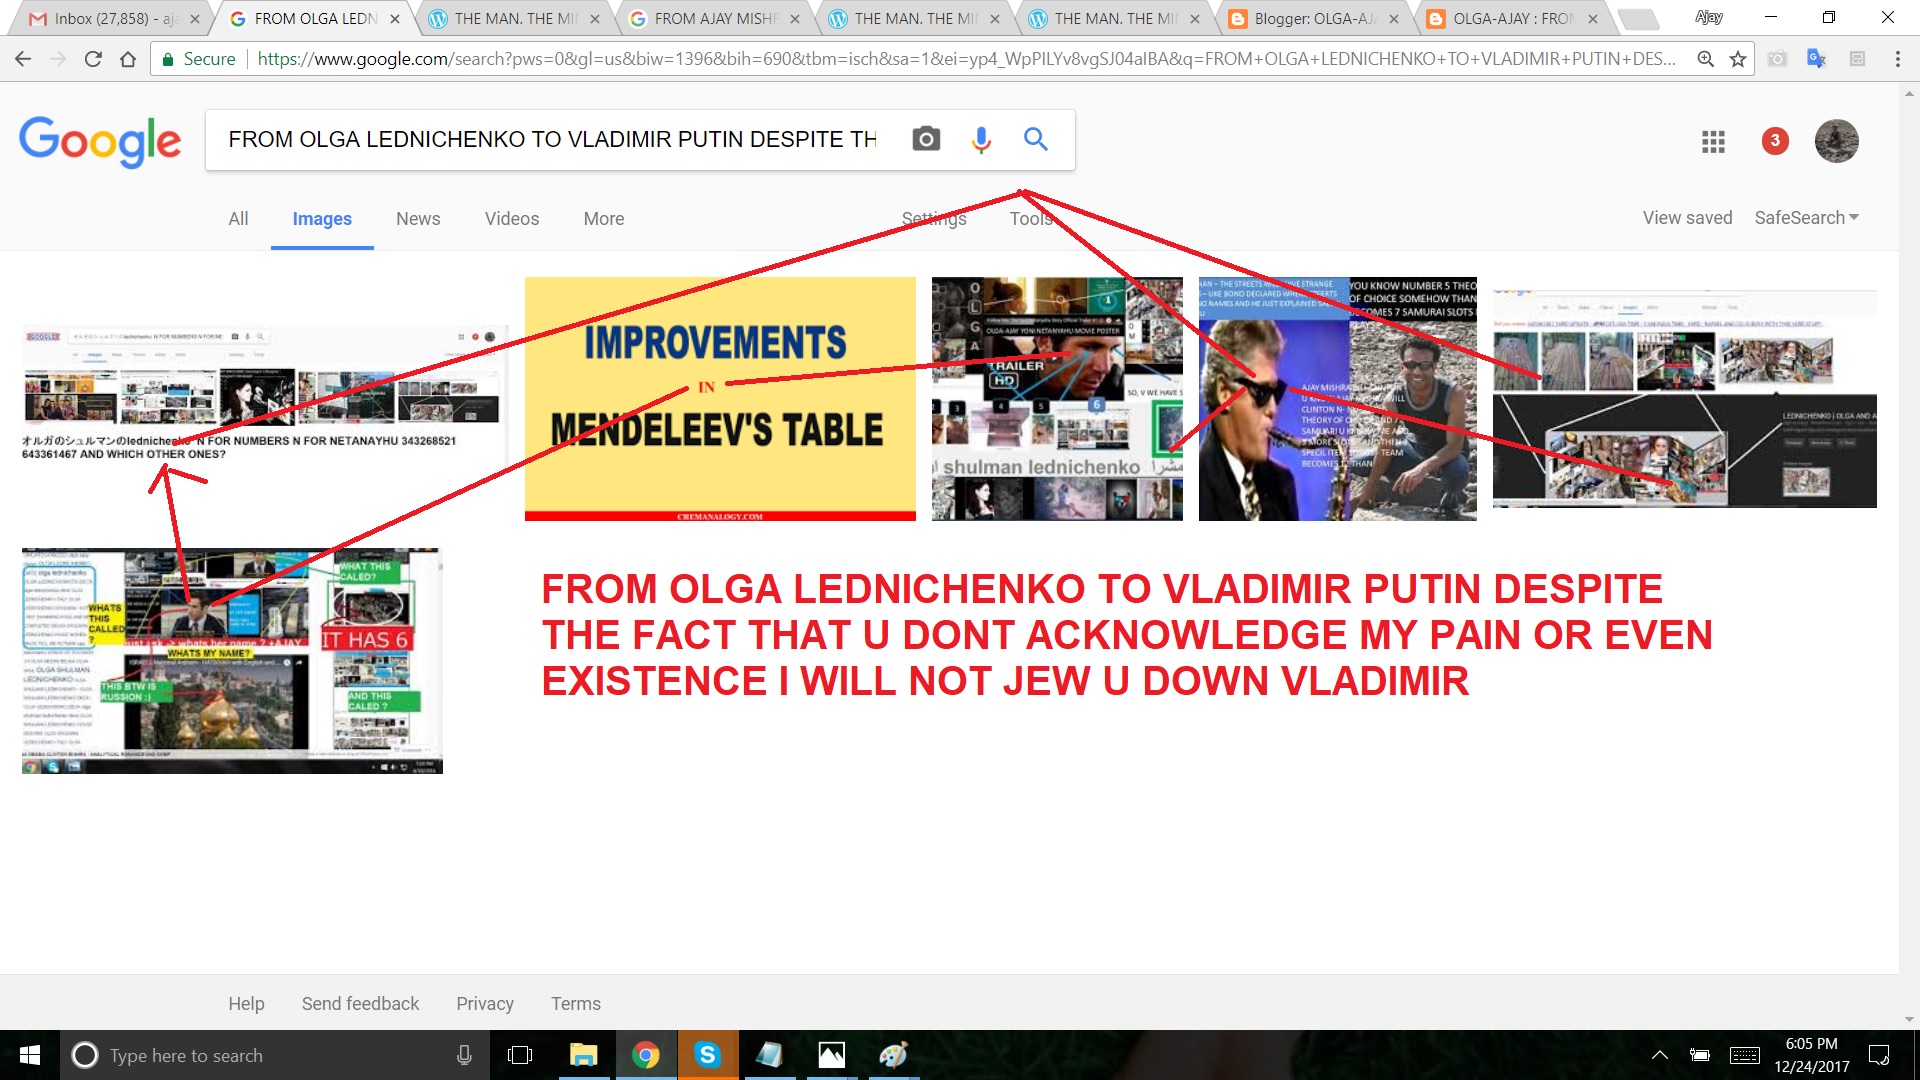 FROM OLGA LEDNICHENKO TO VLADIMIR PUTIN DESPITE THE FACT THAT U DONT ACKNOWLEDGE MY PAIN OR EVEN EXISTENCE I WILL NOT JEW U DOWN VLADIMIR